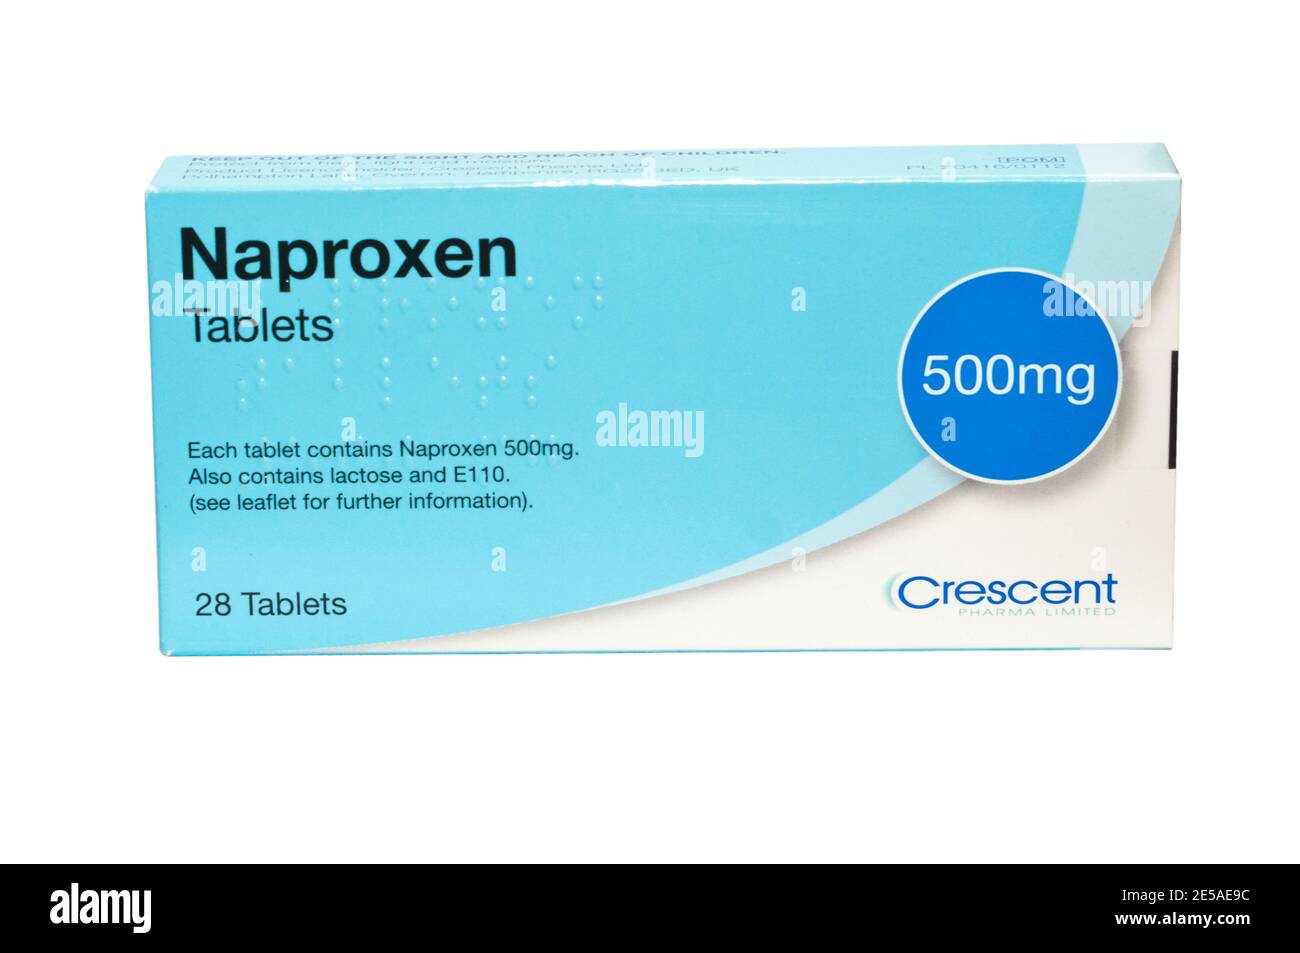 Pack Packet Box Of Naproxen 500mg Tablets Stock Photo